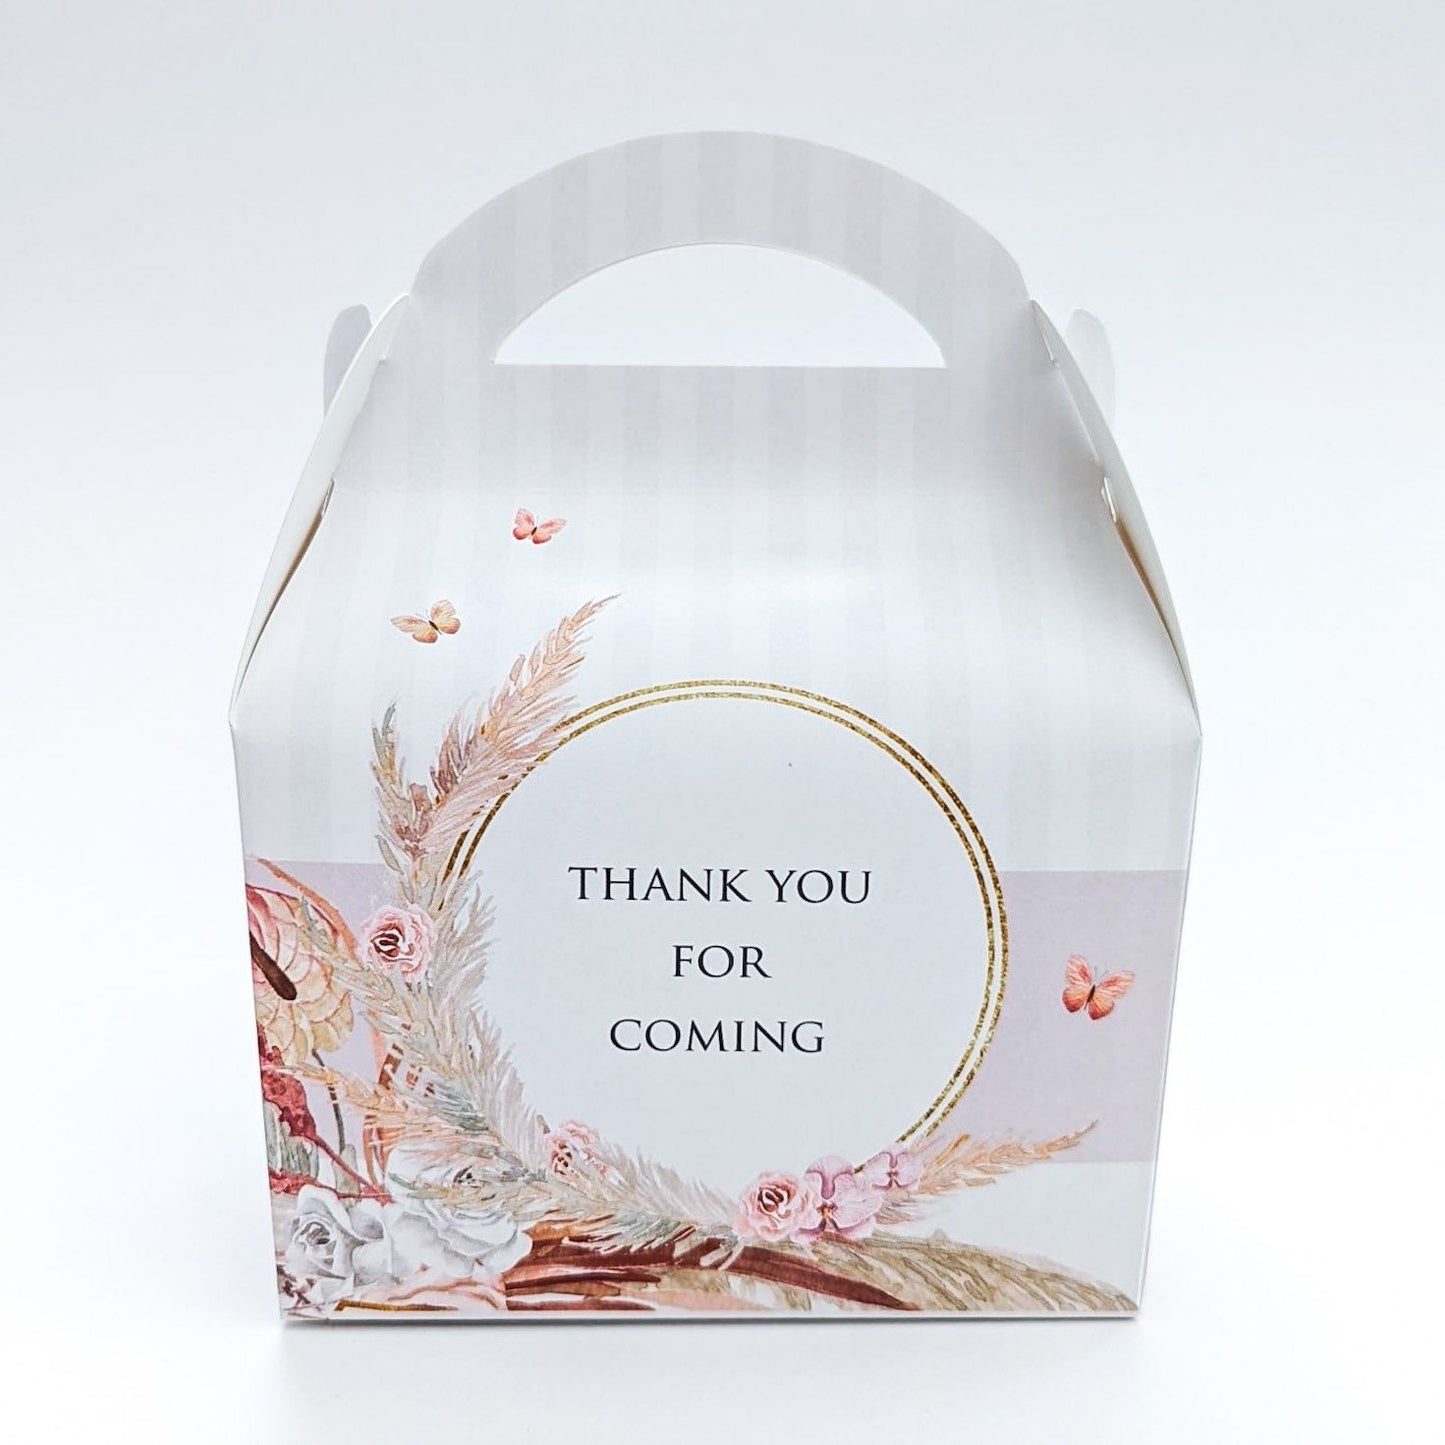 PRINCESS Boho Floral Pampas Personalised Children’s Party Box Gift Bag Favour